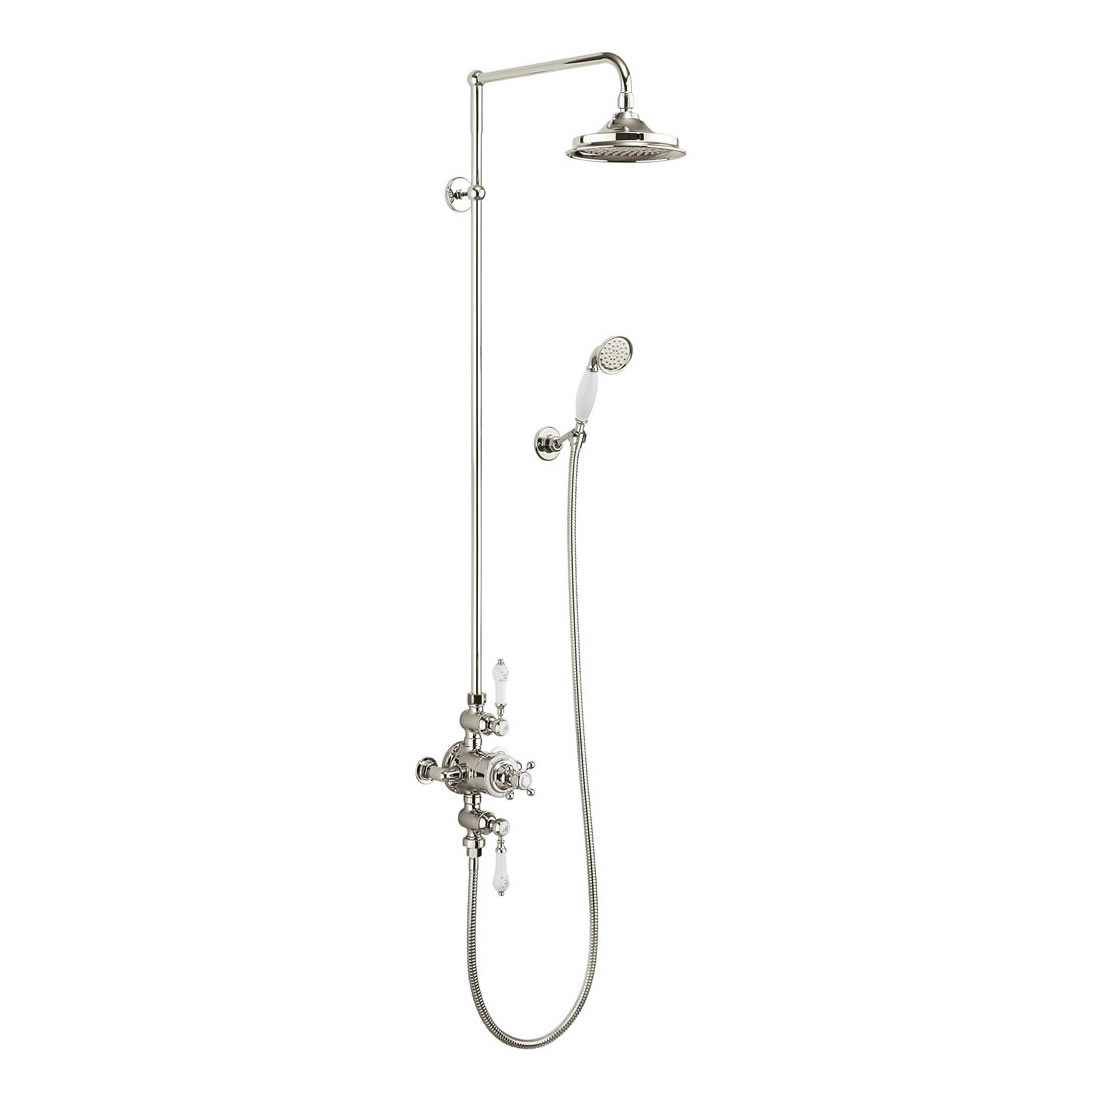 Avon Medici Thermostatic Exposed Shower Valve Two Outlet,Extended Rigid Riser, Swivel Shower Arm, Handset & Holder with Hose with 12 inch rose  -NICKEL